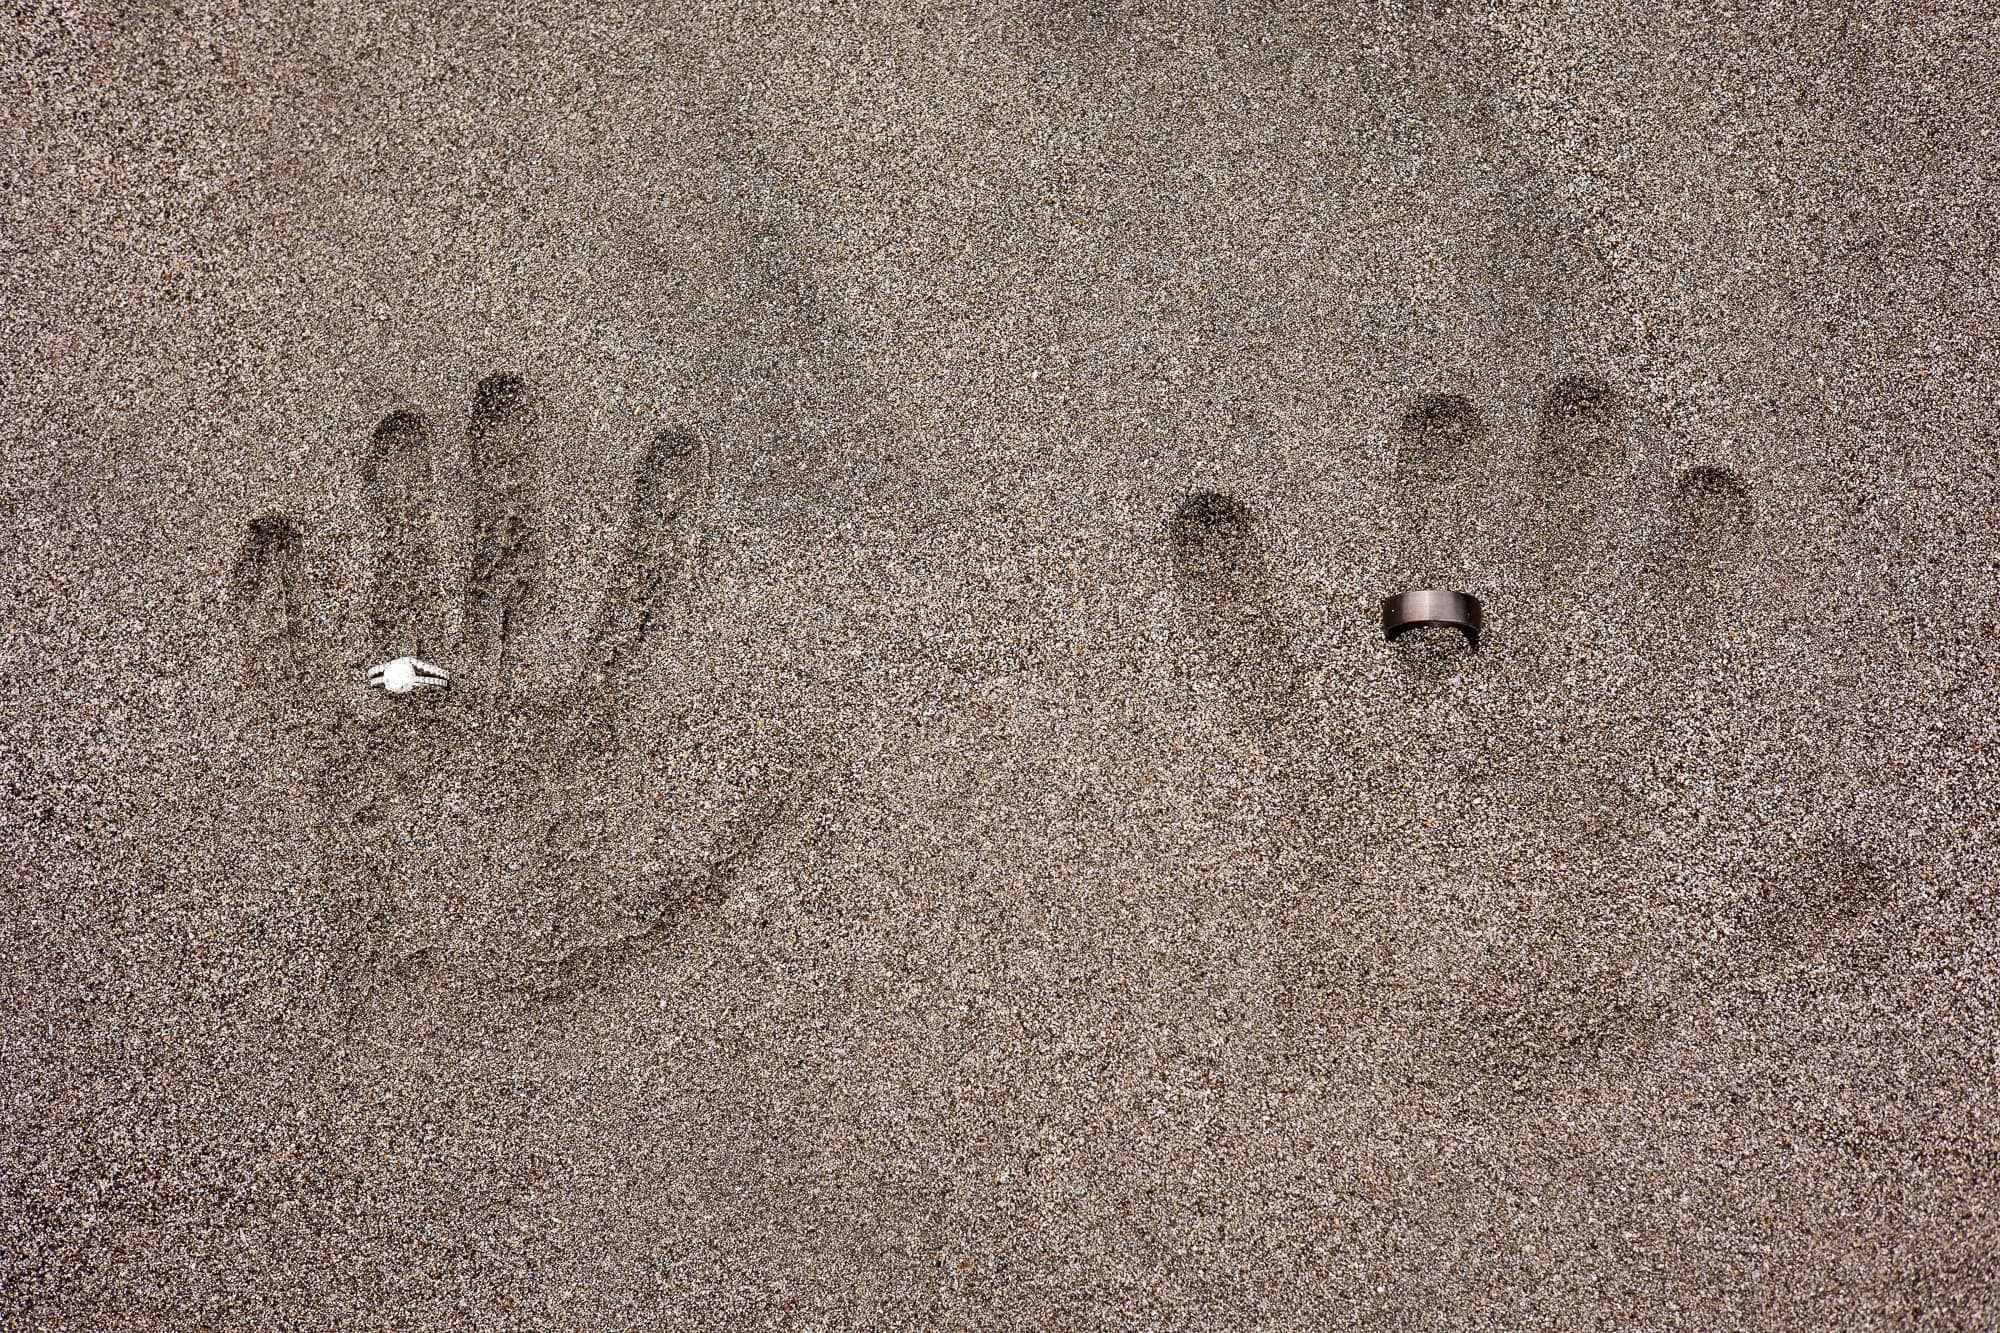 handprints in the sand wearing wedding rings